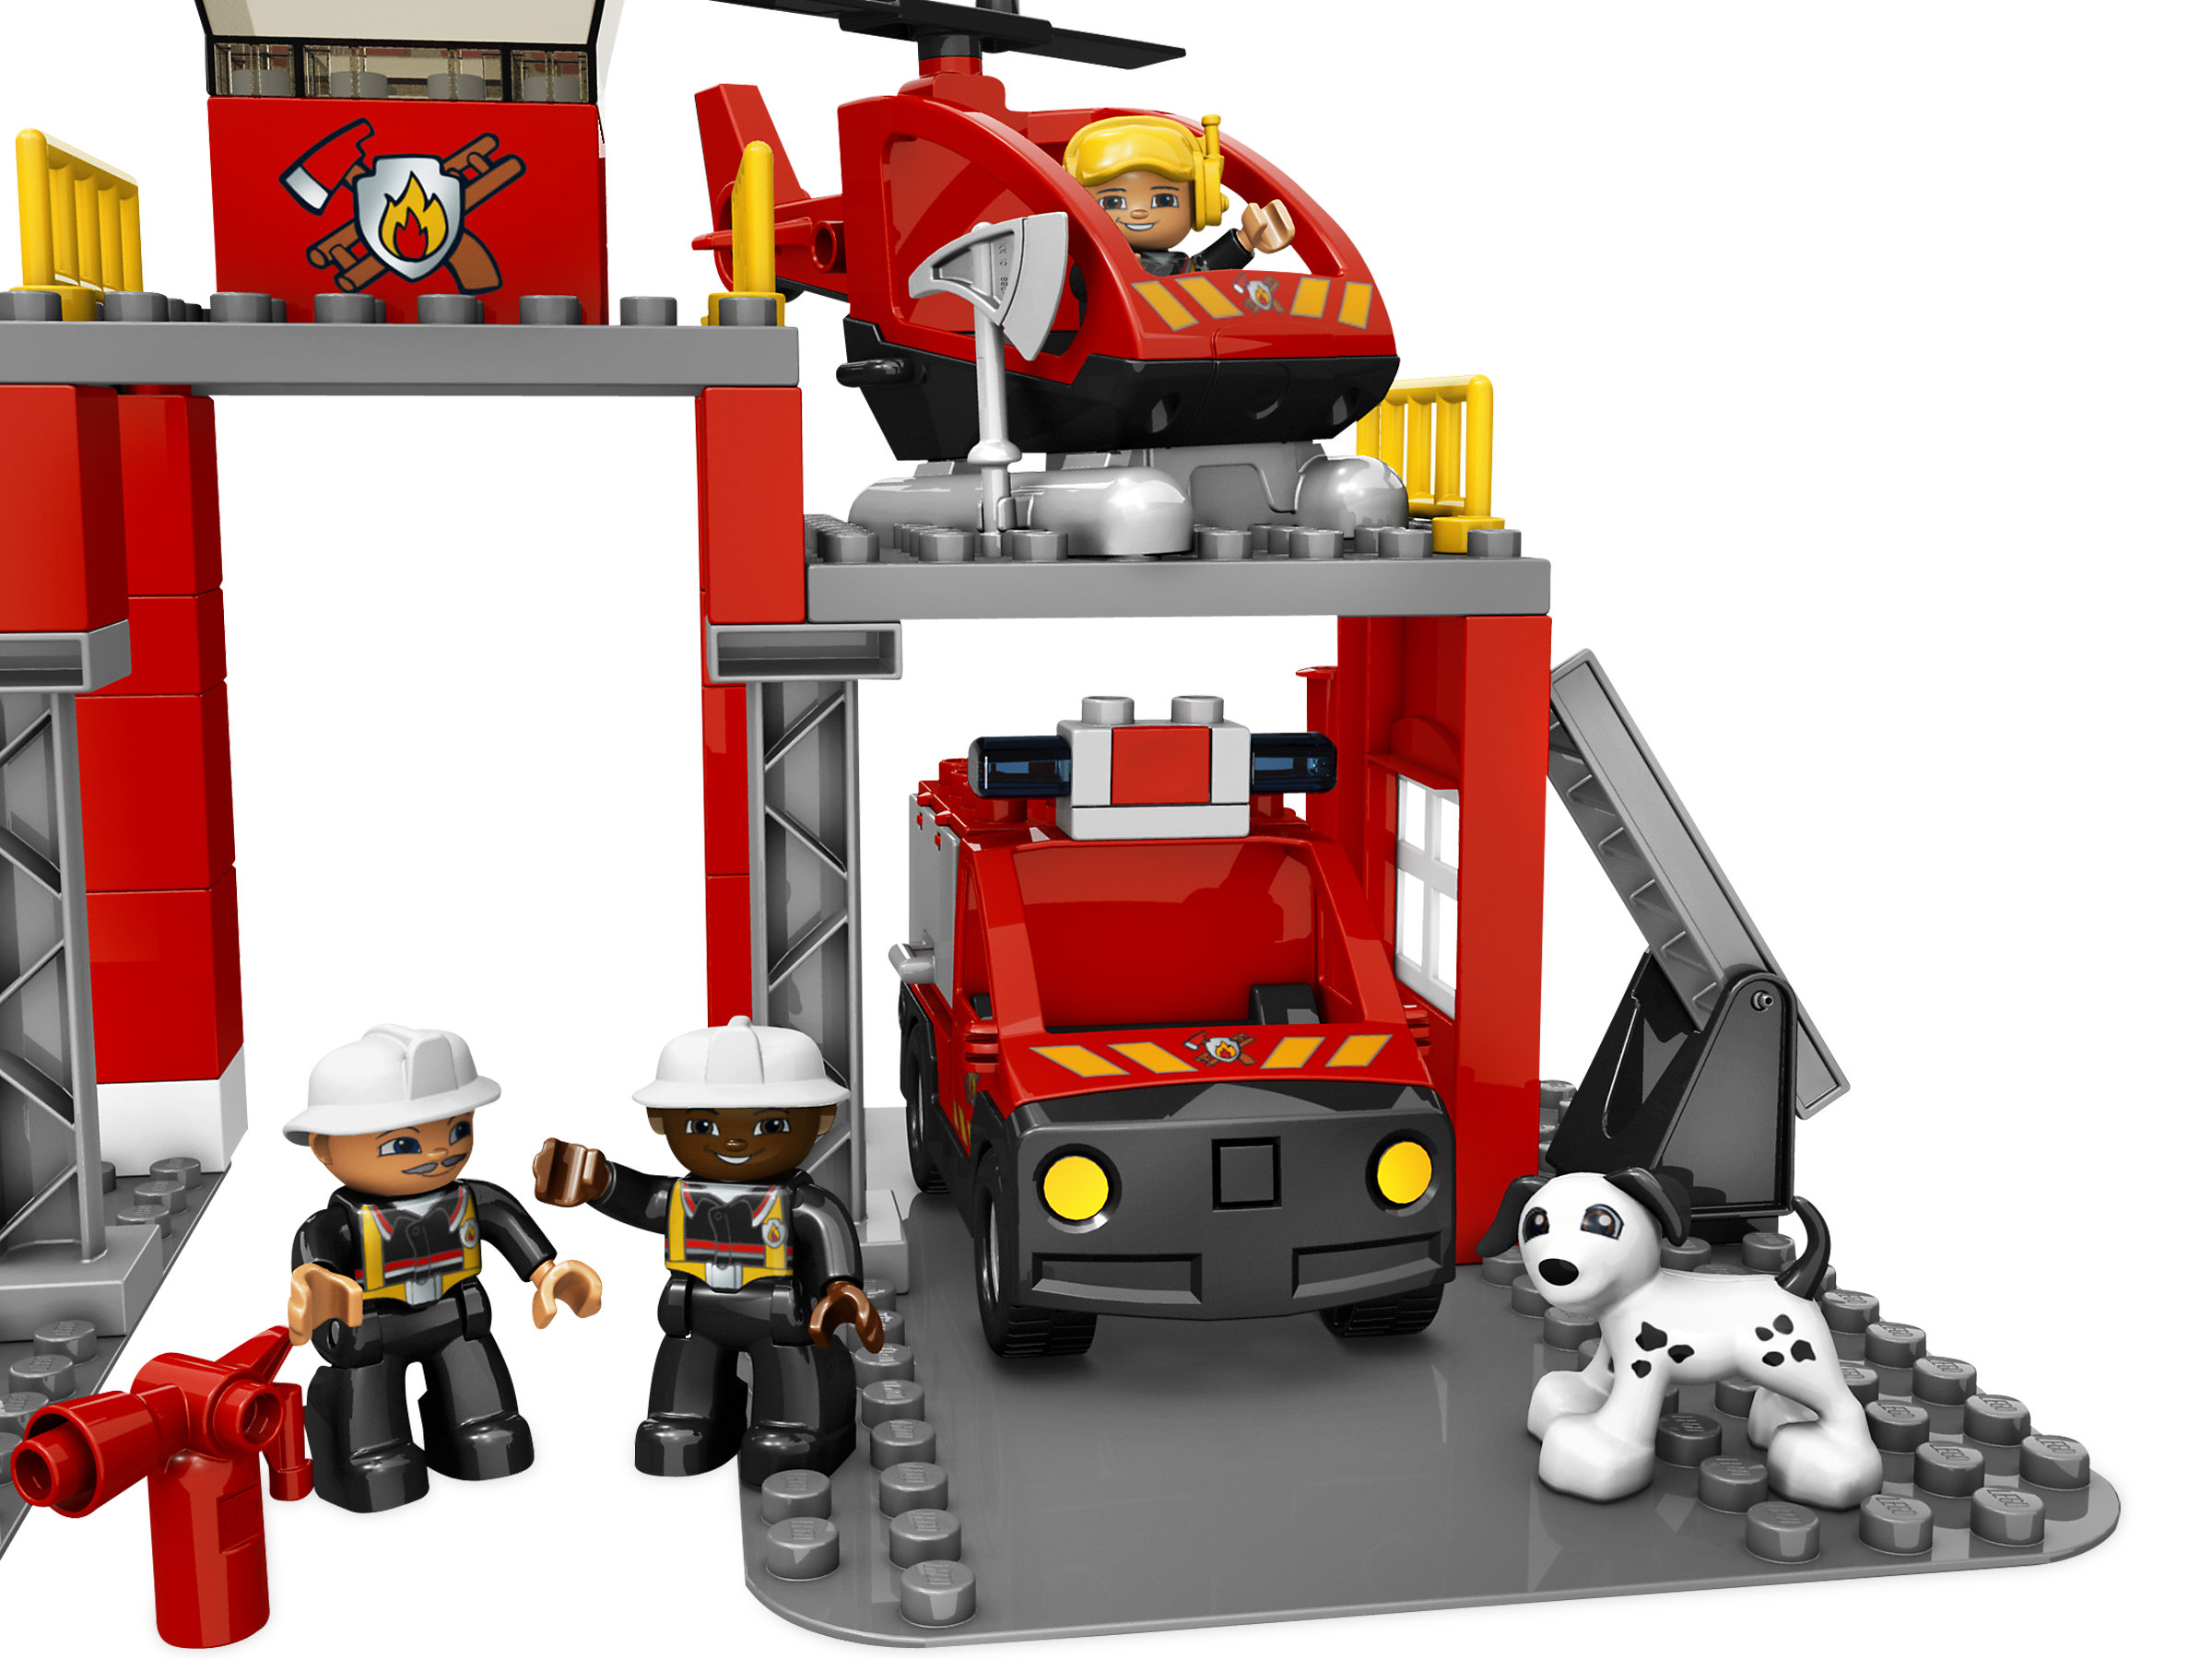 Fire Station 5601